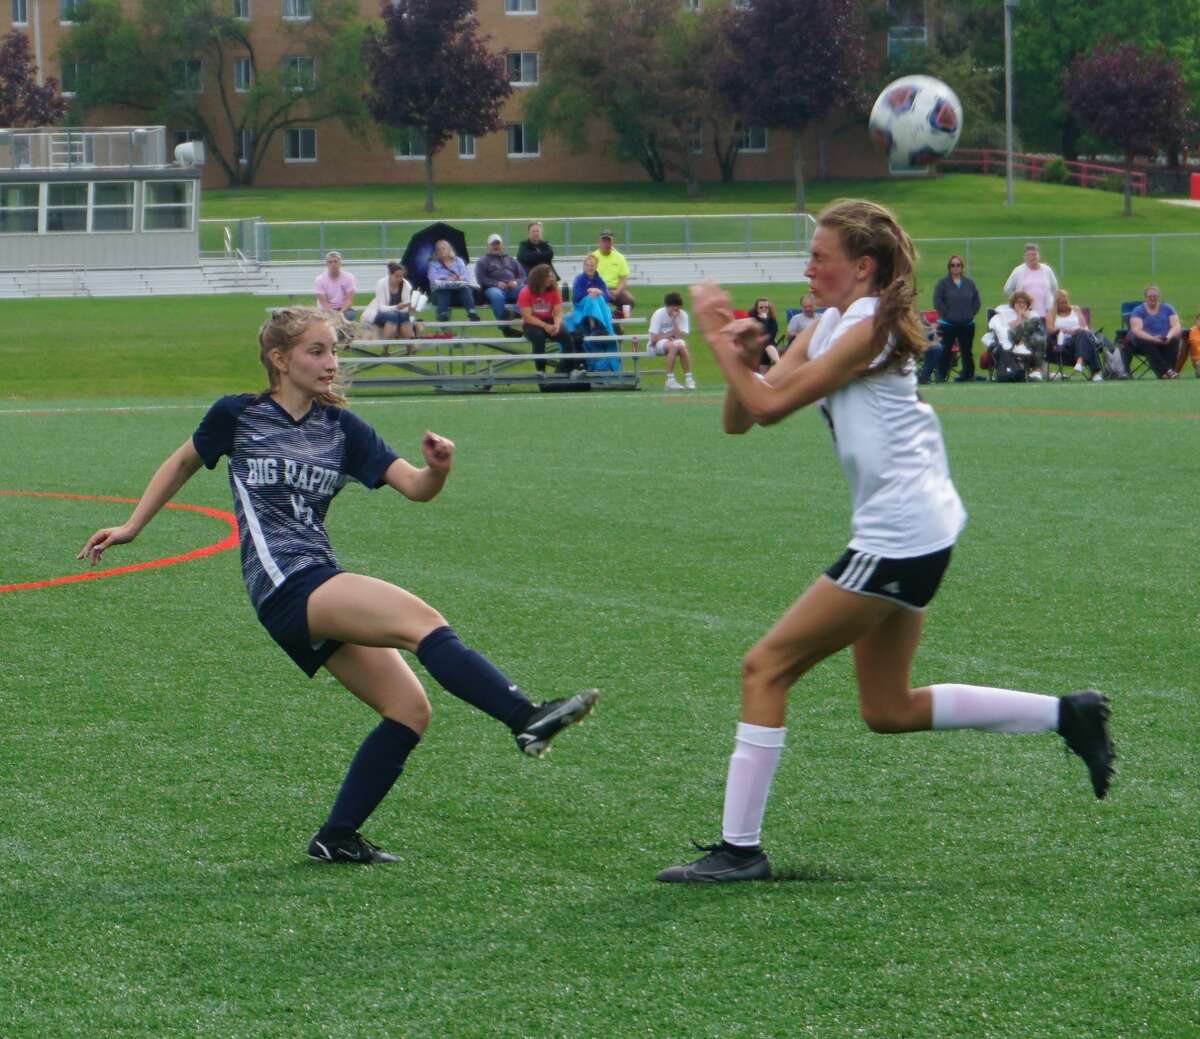 The Big Rapids girls soccer team defeated Reed City 1-0 in the CSAA Tournament semifinal game on Wednesday evening. The Big Rapids girls soccer team defeated Reed City 1-0 in the CSAA Tournament semifinal game on Wednesday evening.